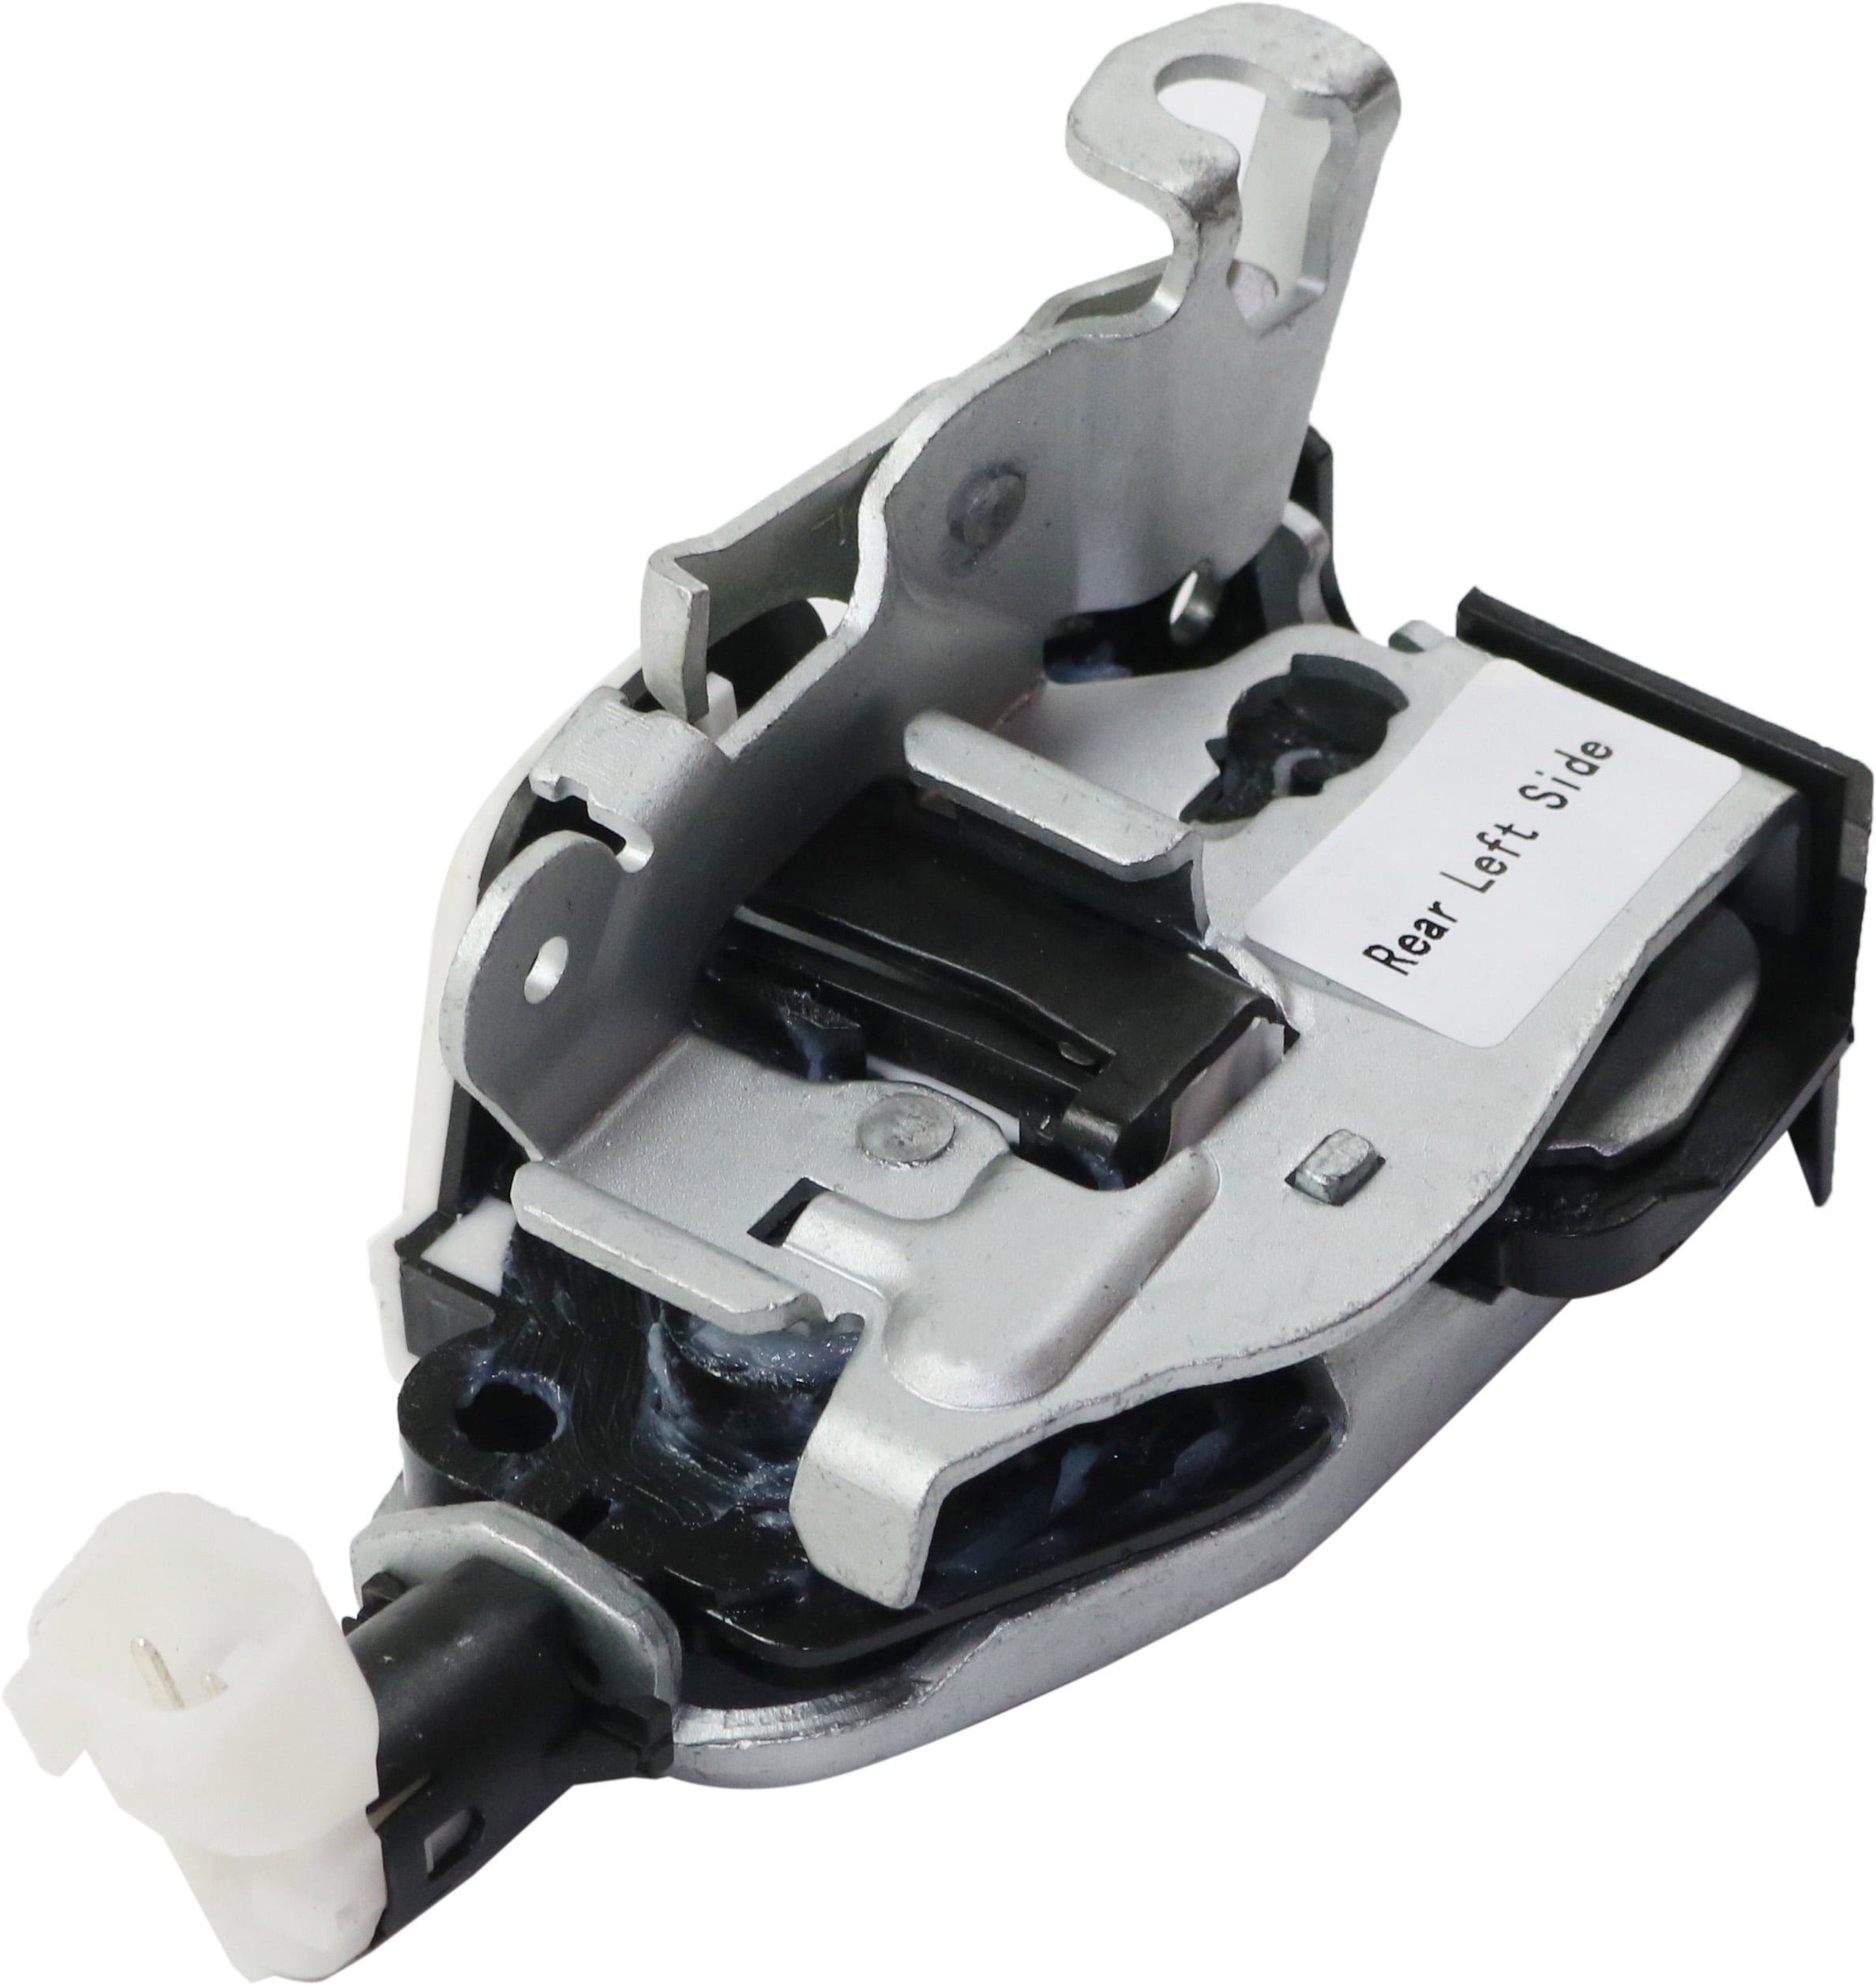 Garage-Pro Rear Door Lock Actuator Compatible with 1998-2011 Ford Ranger Lower Integrated with Latch Passenger and Driver Side 